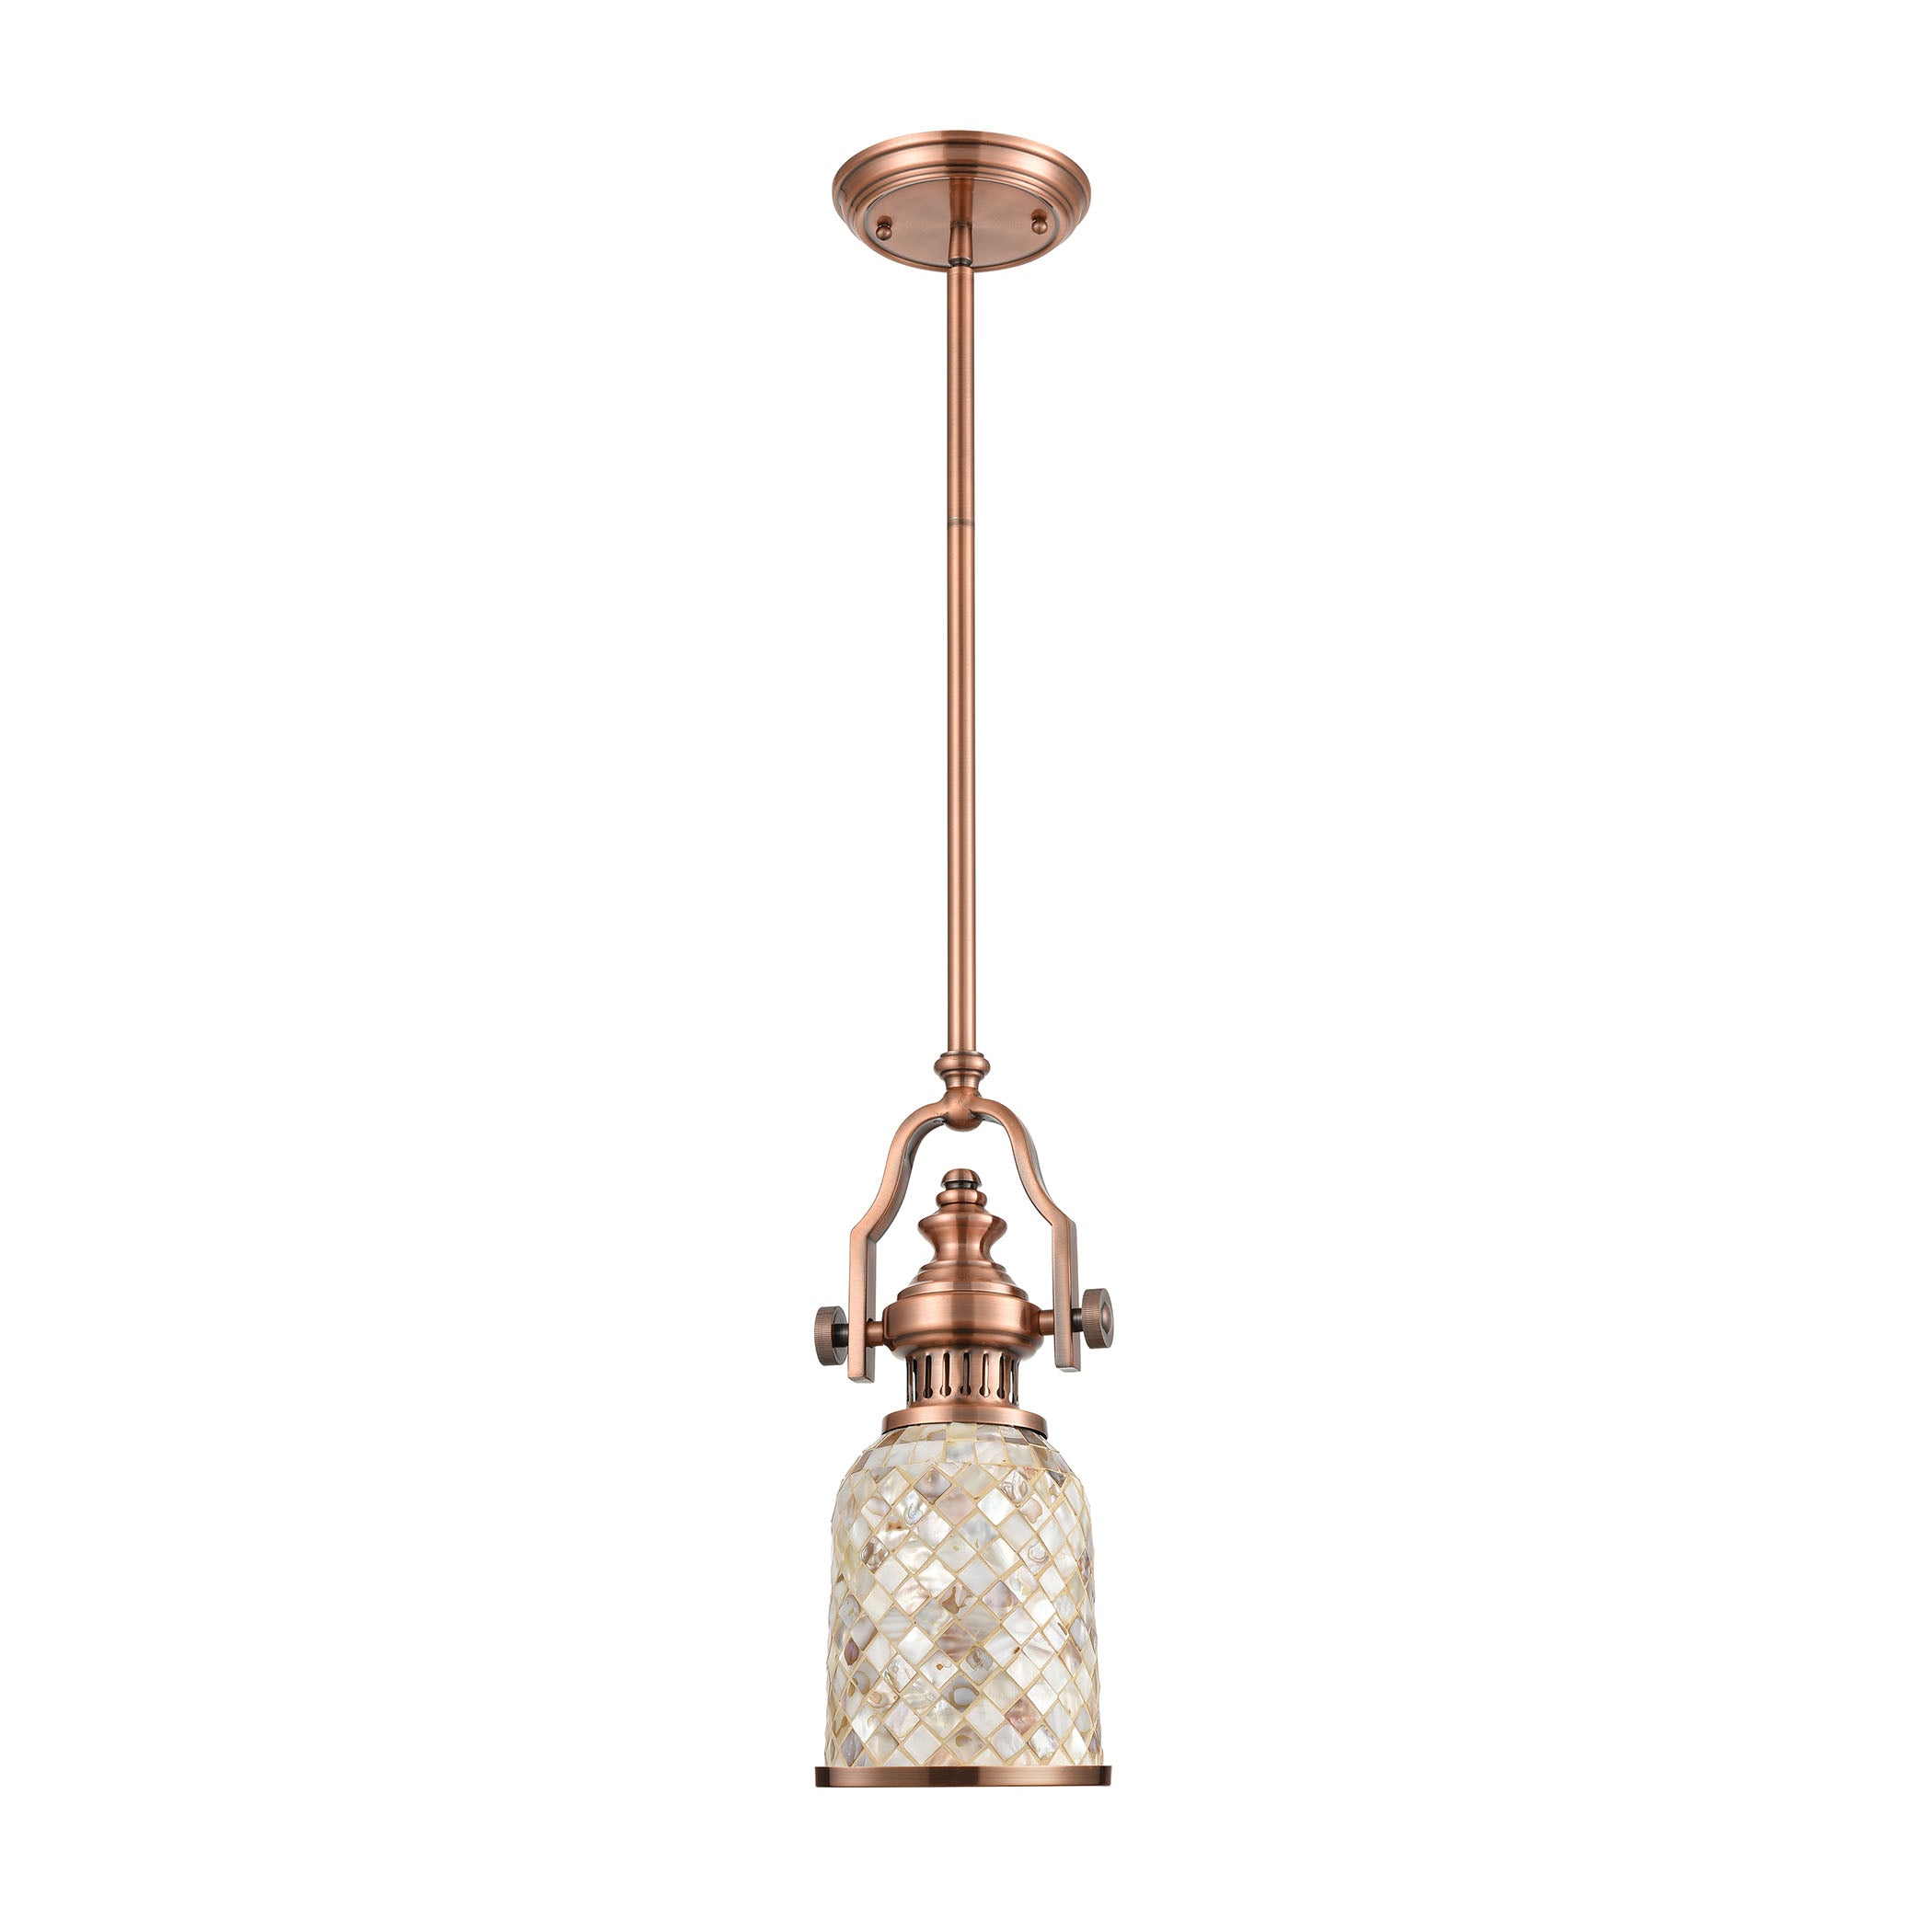 ELK Lighting 66442-1 Chadwick 1-Light Mini Pendant in Antique Copper with Cappa Shell Shade